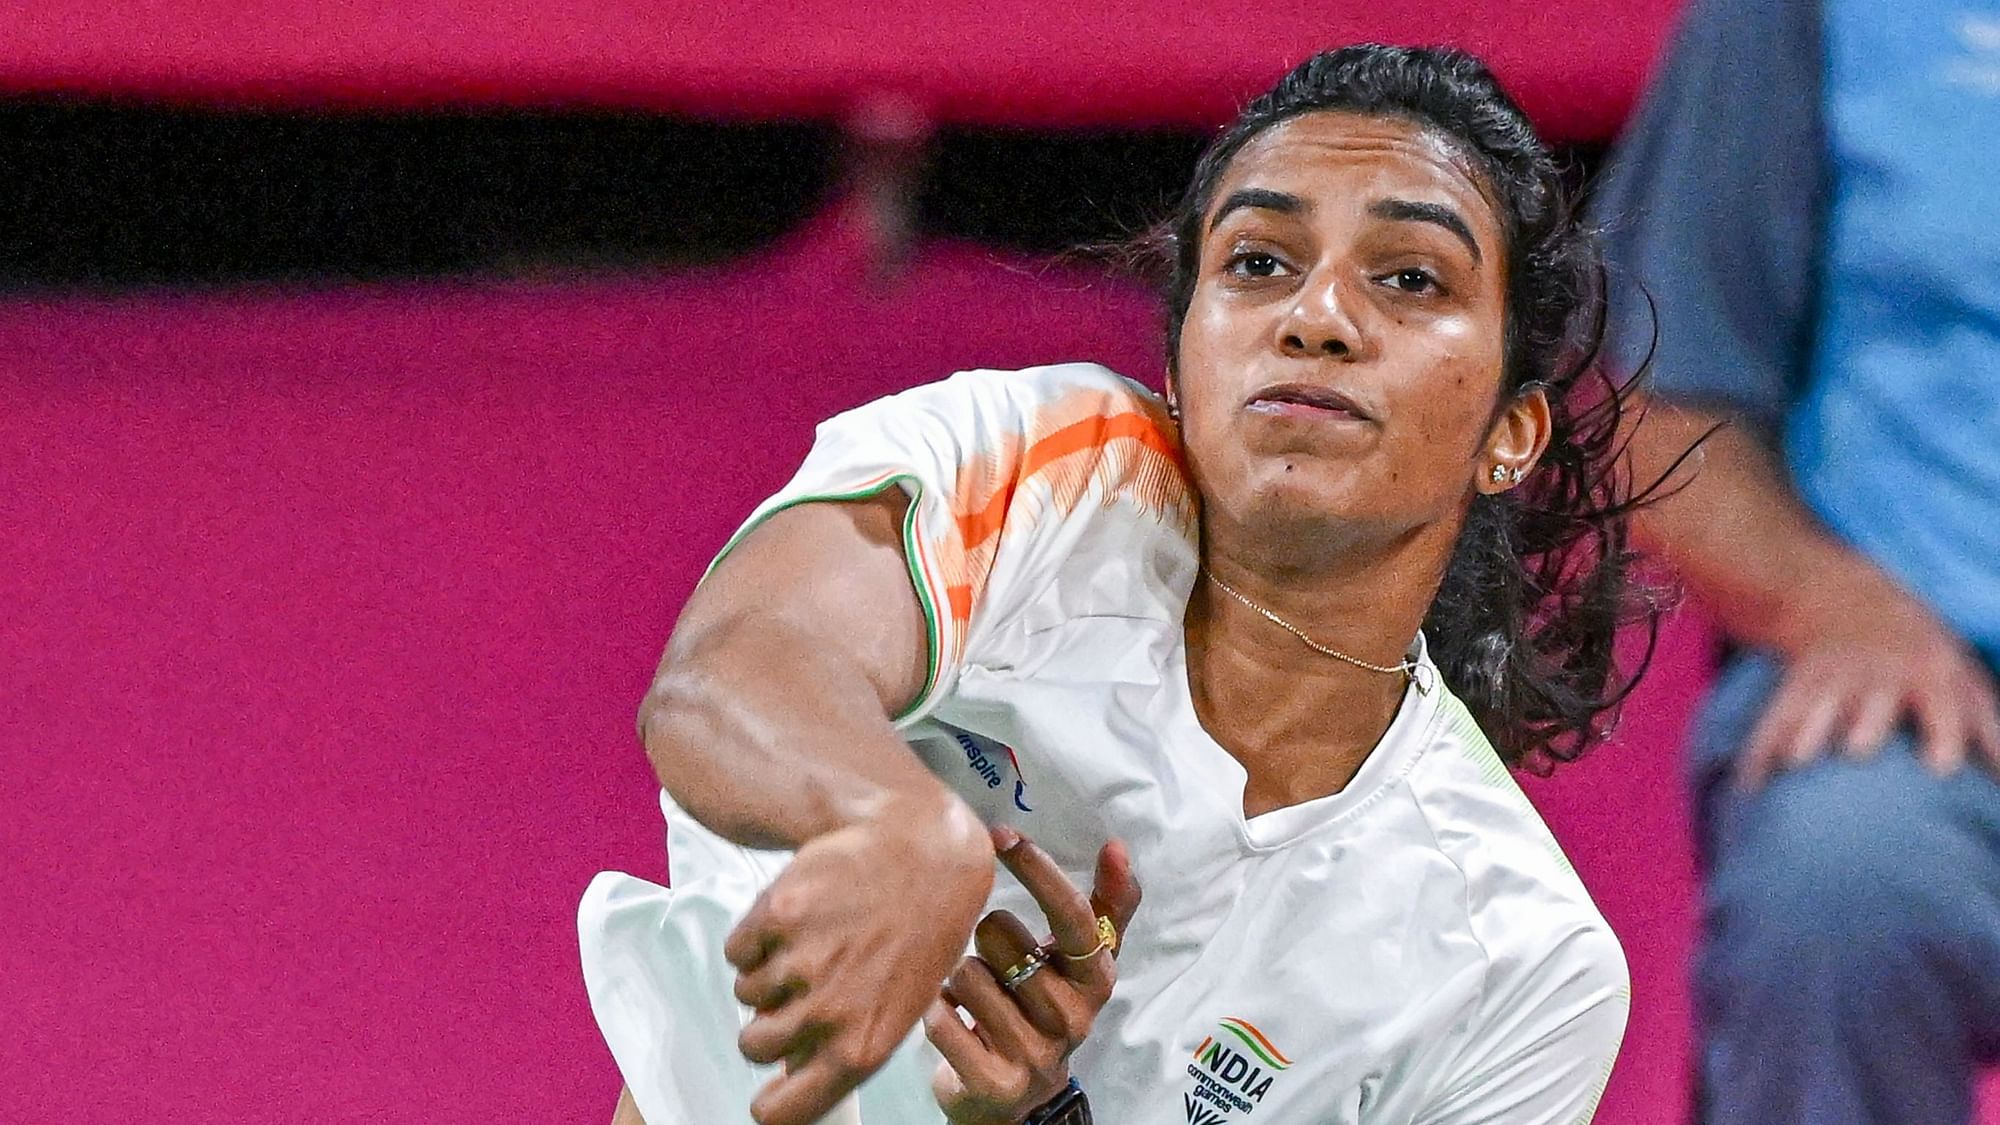 <div class="paragraphs"><p>India's PV Sindhu plays a shot against Uganda's Husina Kobugabe in the women's singles Round of 16 badminton match at the 2022 Commonwealth Games in Birmingham on Friday.</p></div>